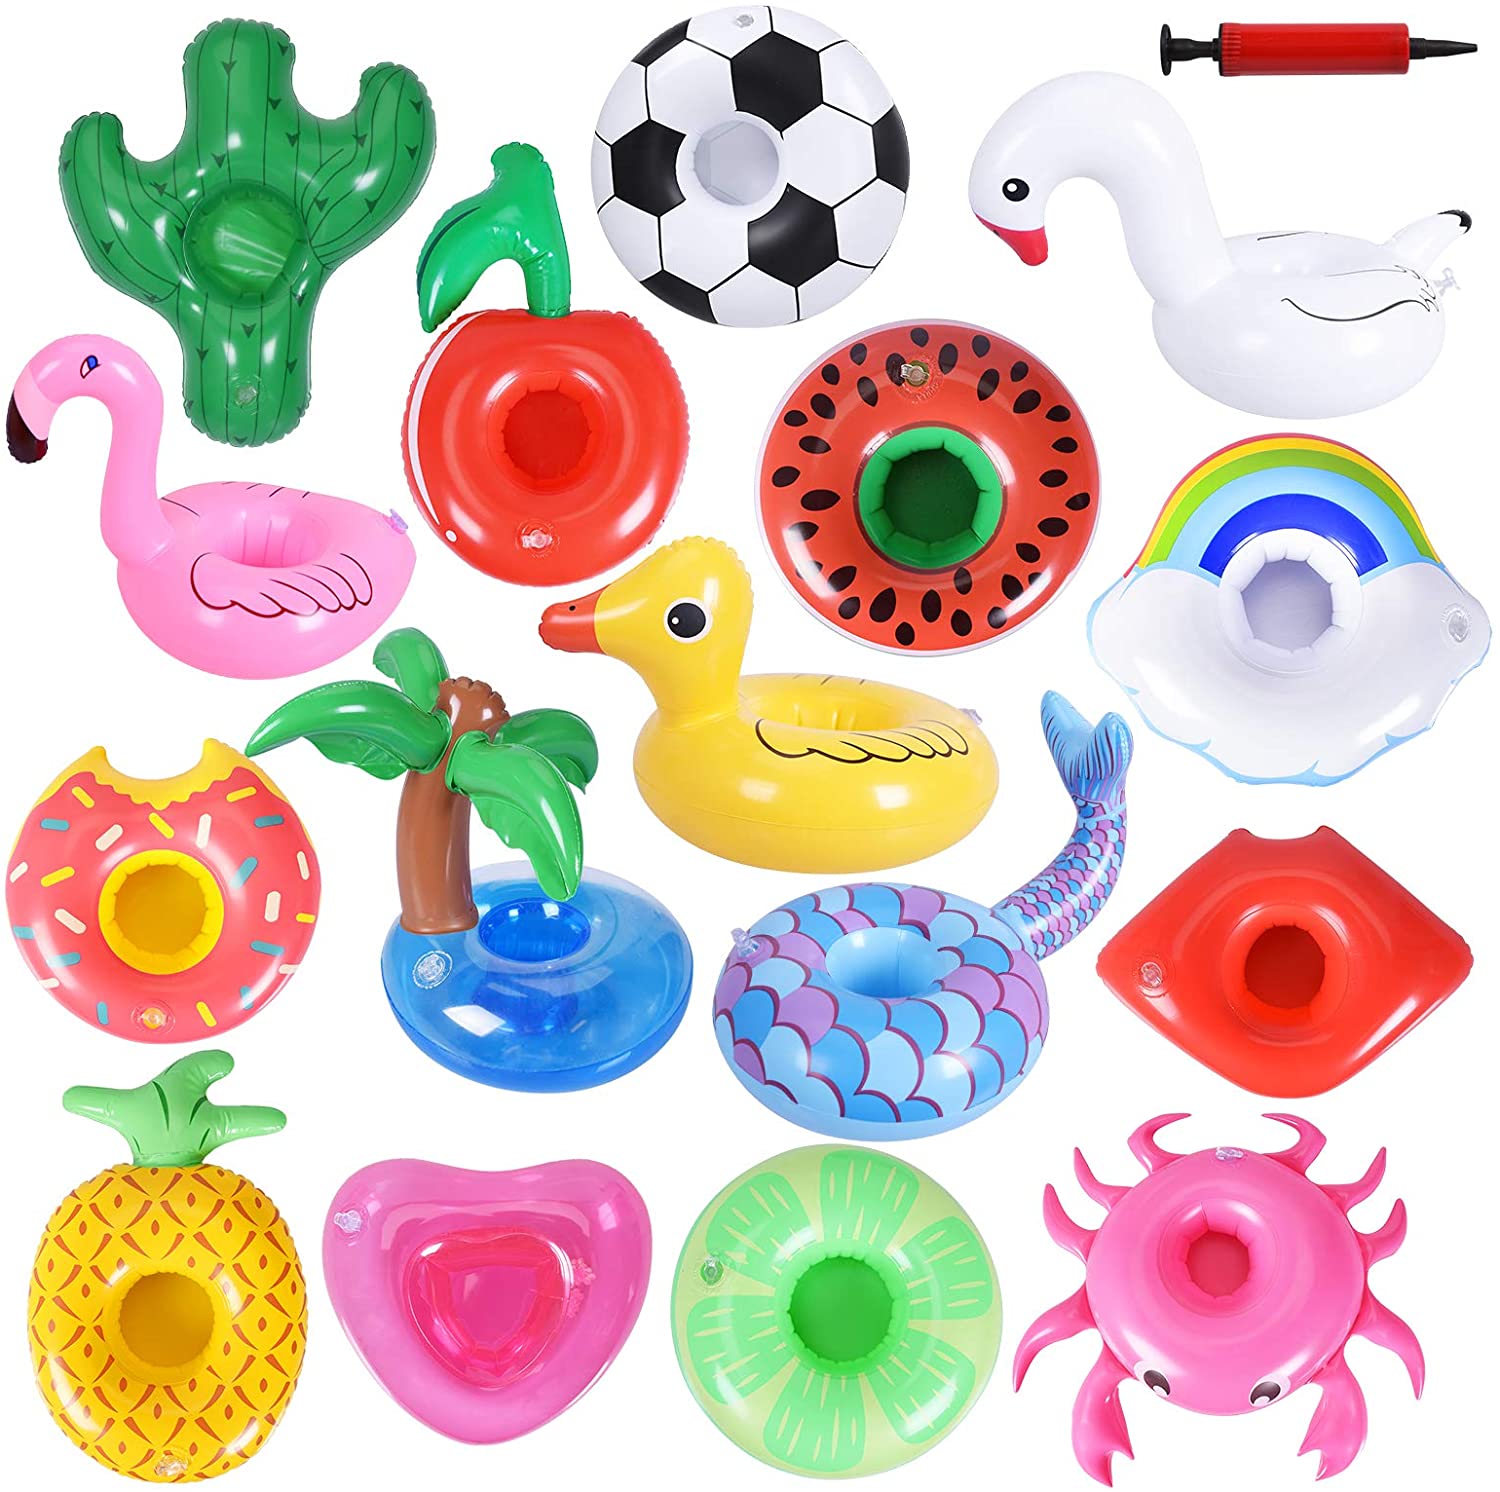 13 PCS Max Fun Inflatable Drink Holders Flamingo Pineapple Floats Cup Coasters with Inflatable Pump for Kids Toys and Pool Party 